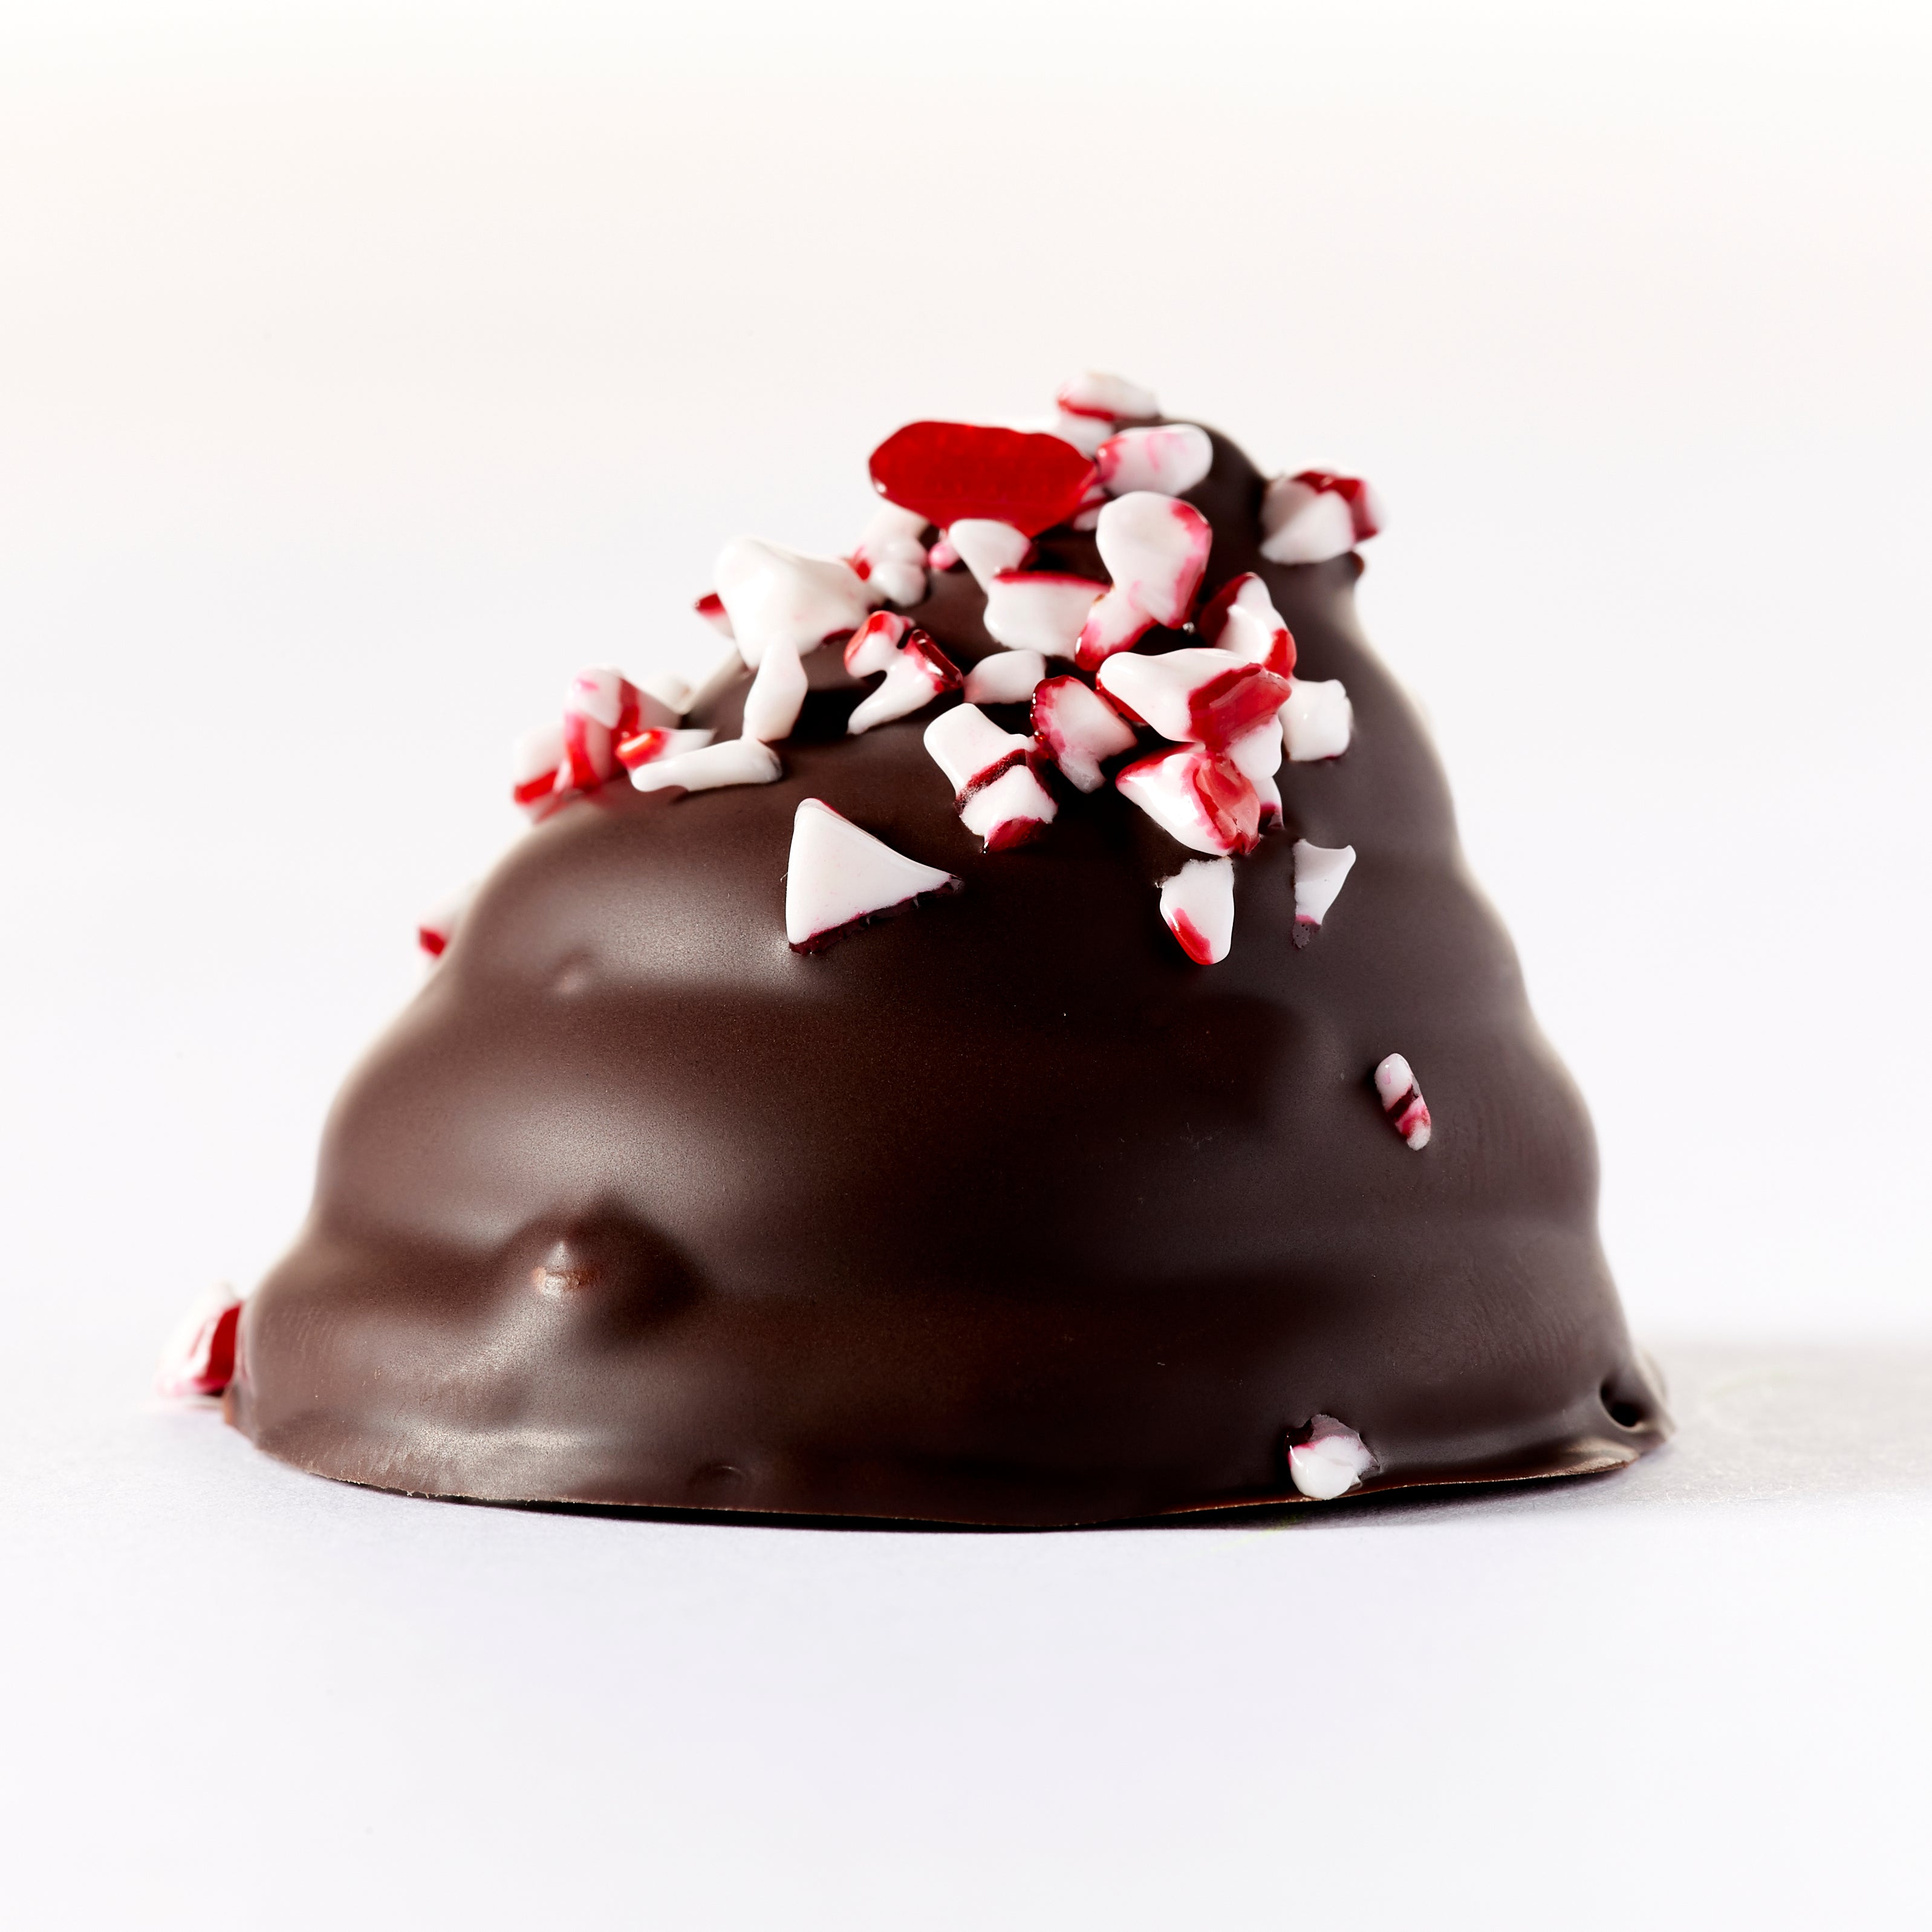 Conitos Truffle Cookies: Chocolate + Peppermint - Cerro Navidad! Wooden Table Baking Co.